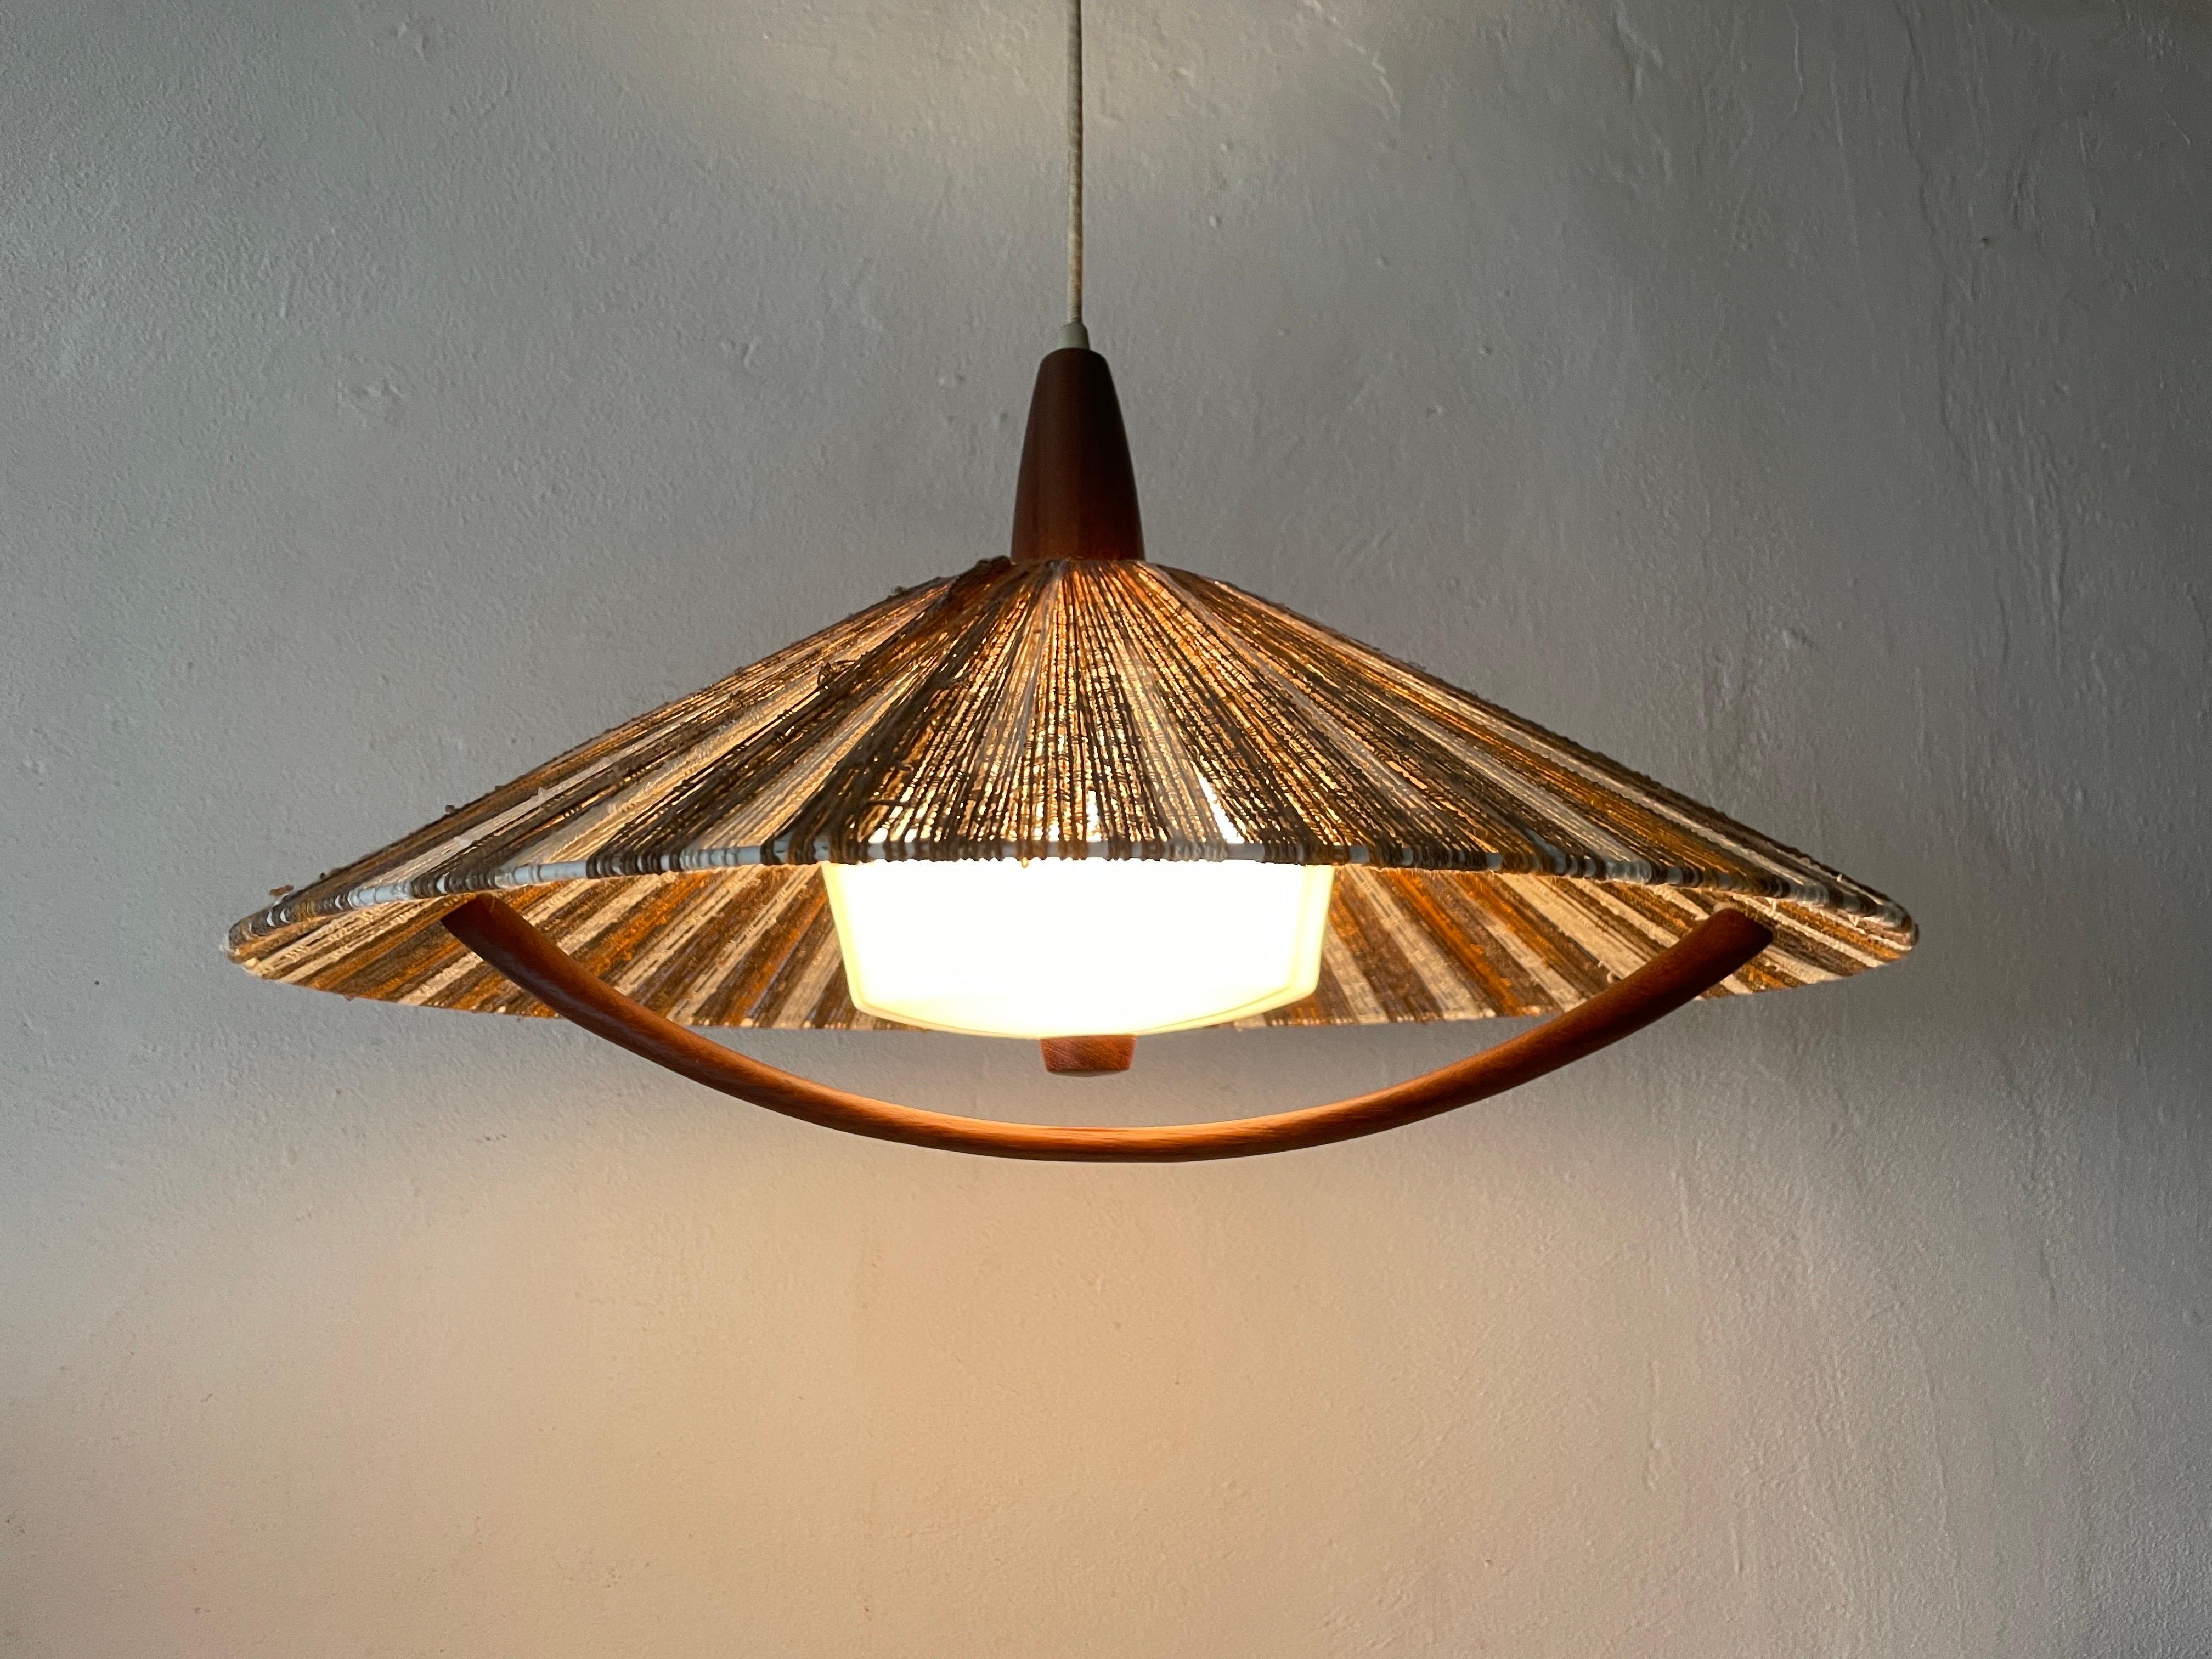 Colorful Raffia Bast and Teak Pendant Lamp by Temde, 1960s, Germany For Sale 4